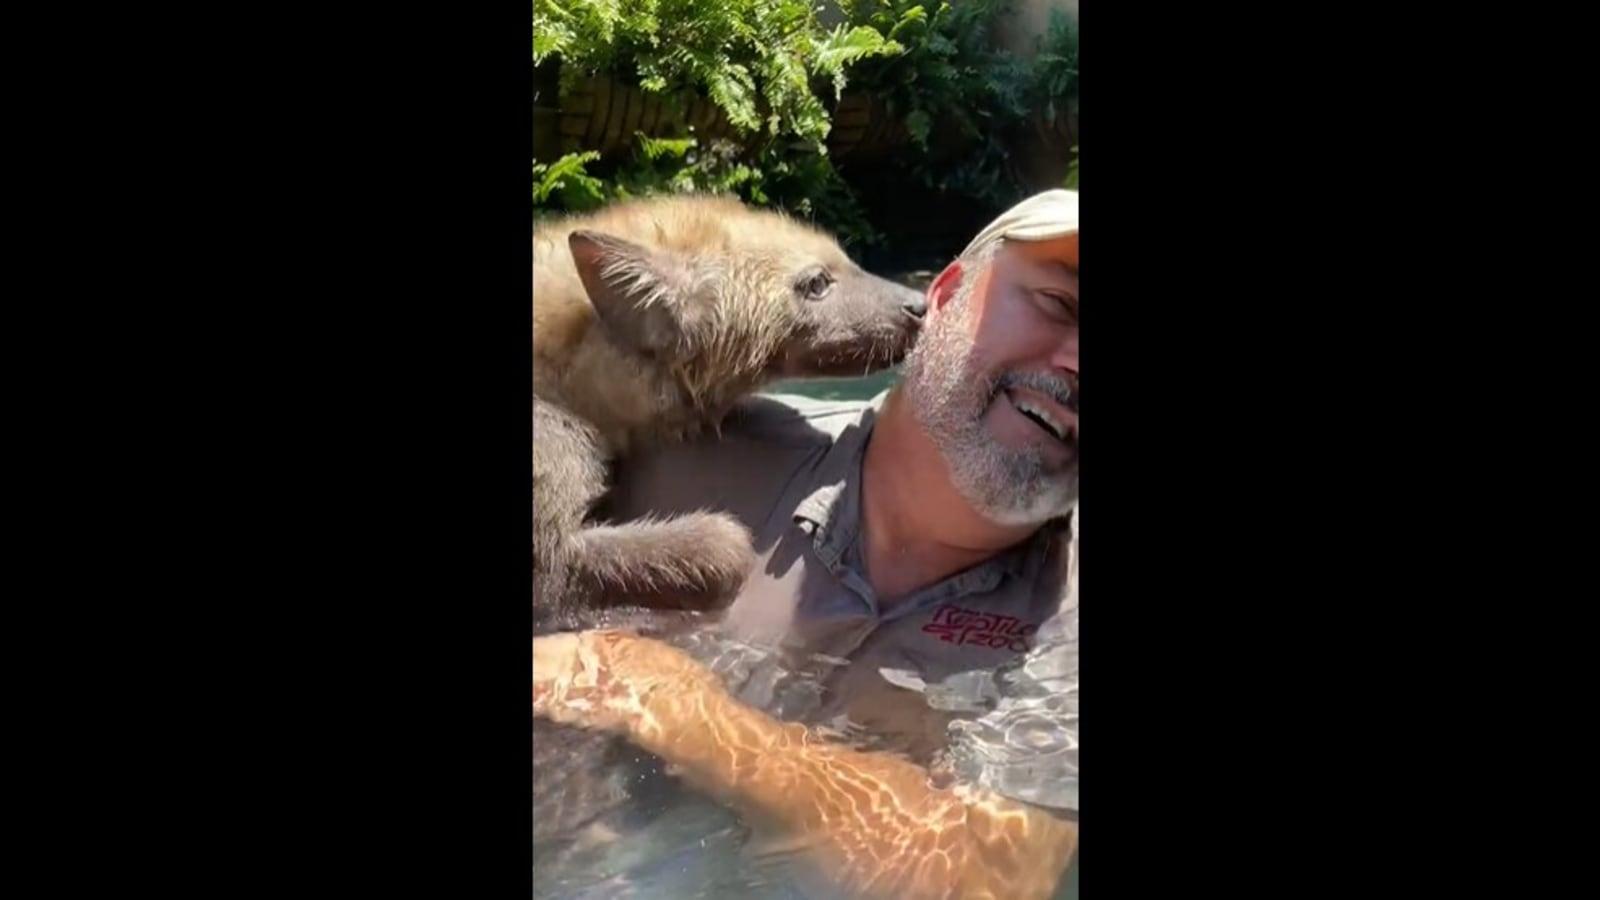 Hyena gives zookeeper ‘kisses’ in video gone viral. Over a million views so far | Trending